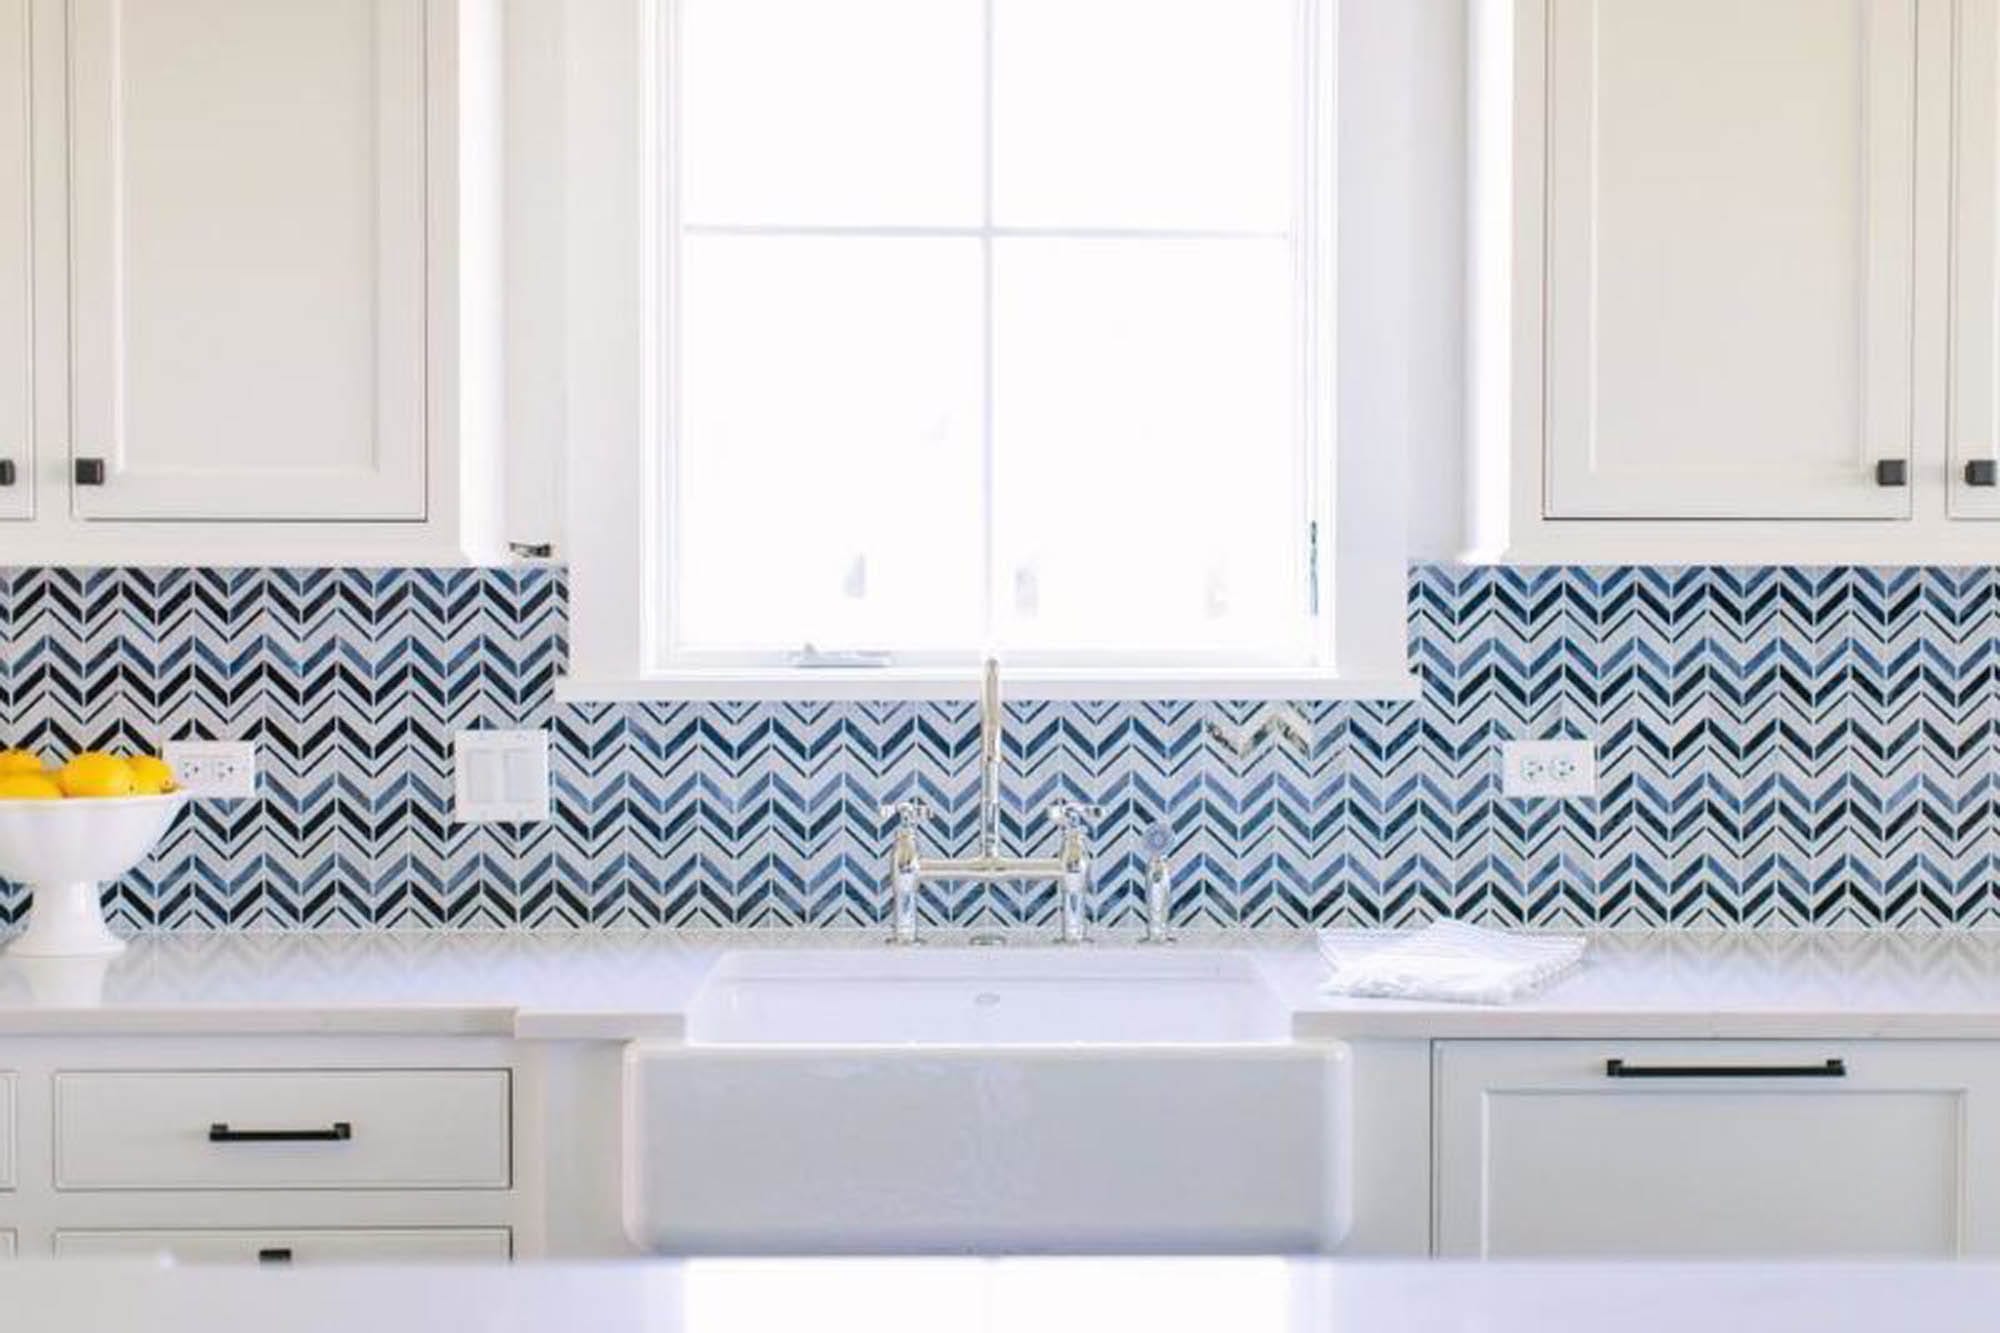 4 Spaces To Add The Effect Of Wallpaper With Tile - The Tile Shop Blog